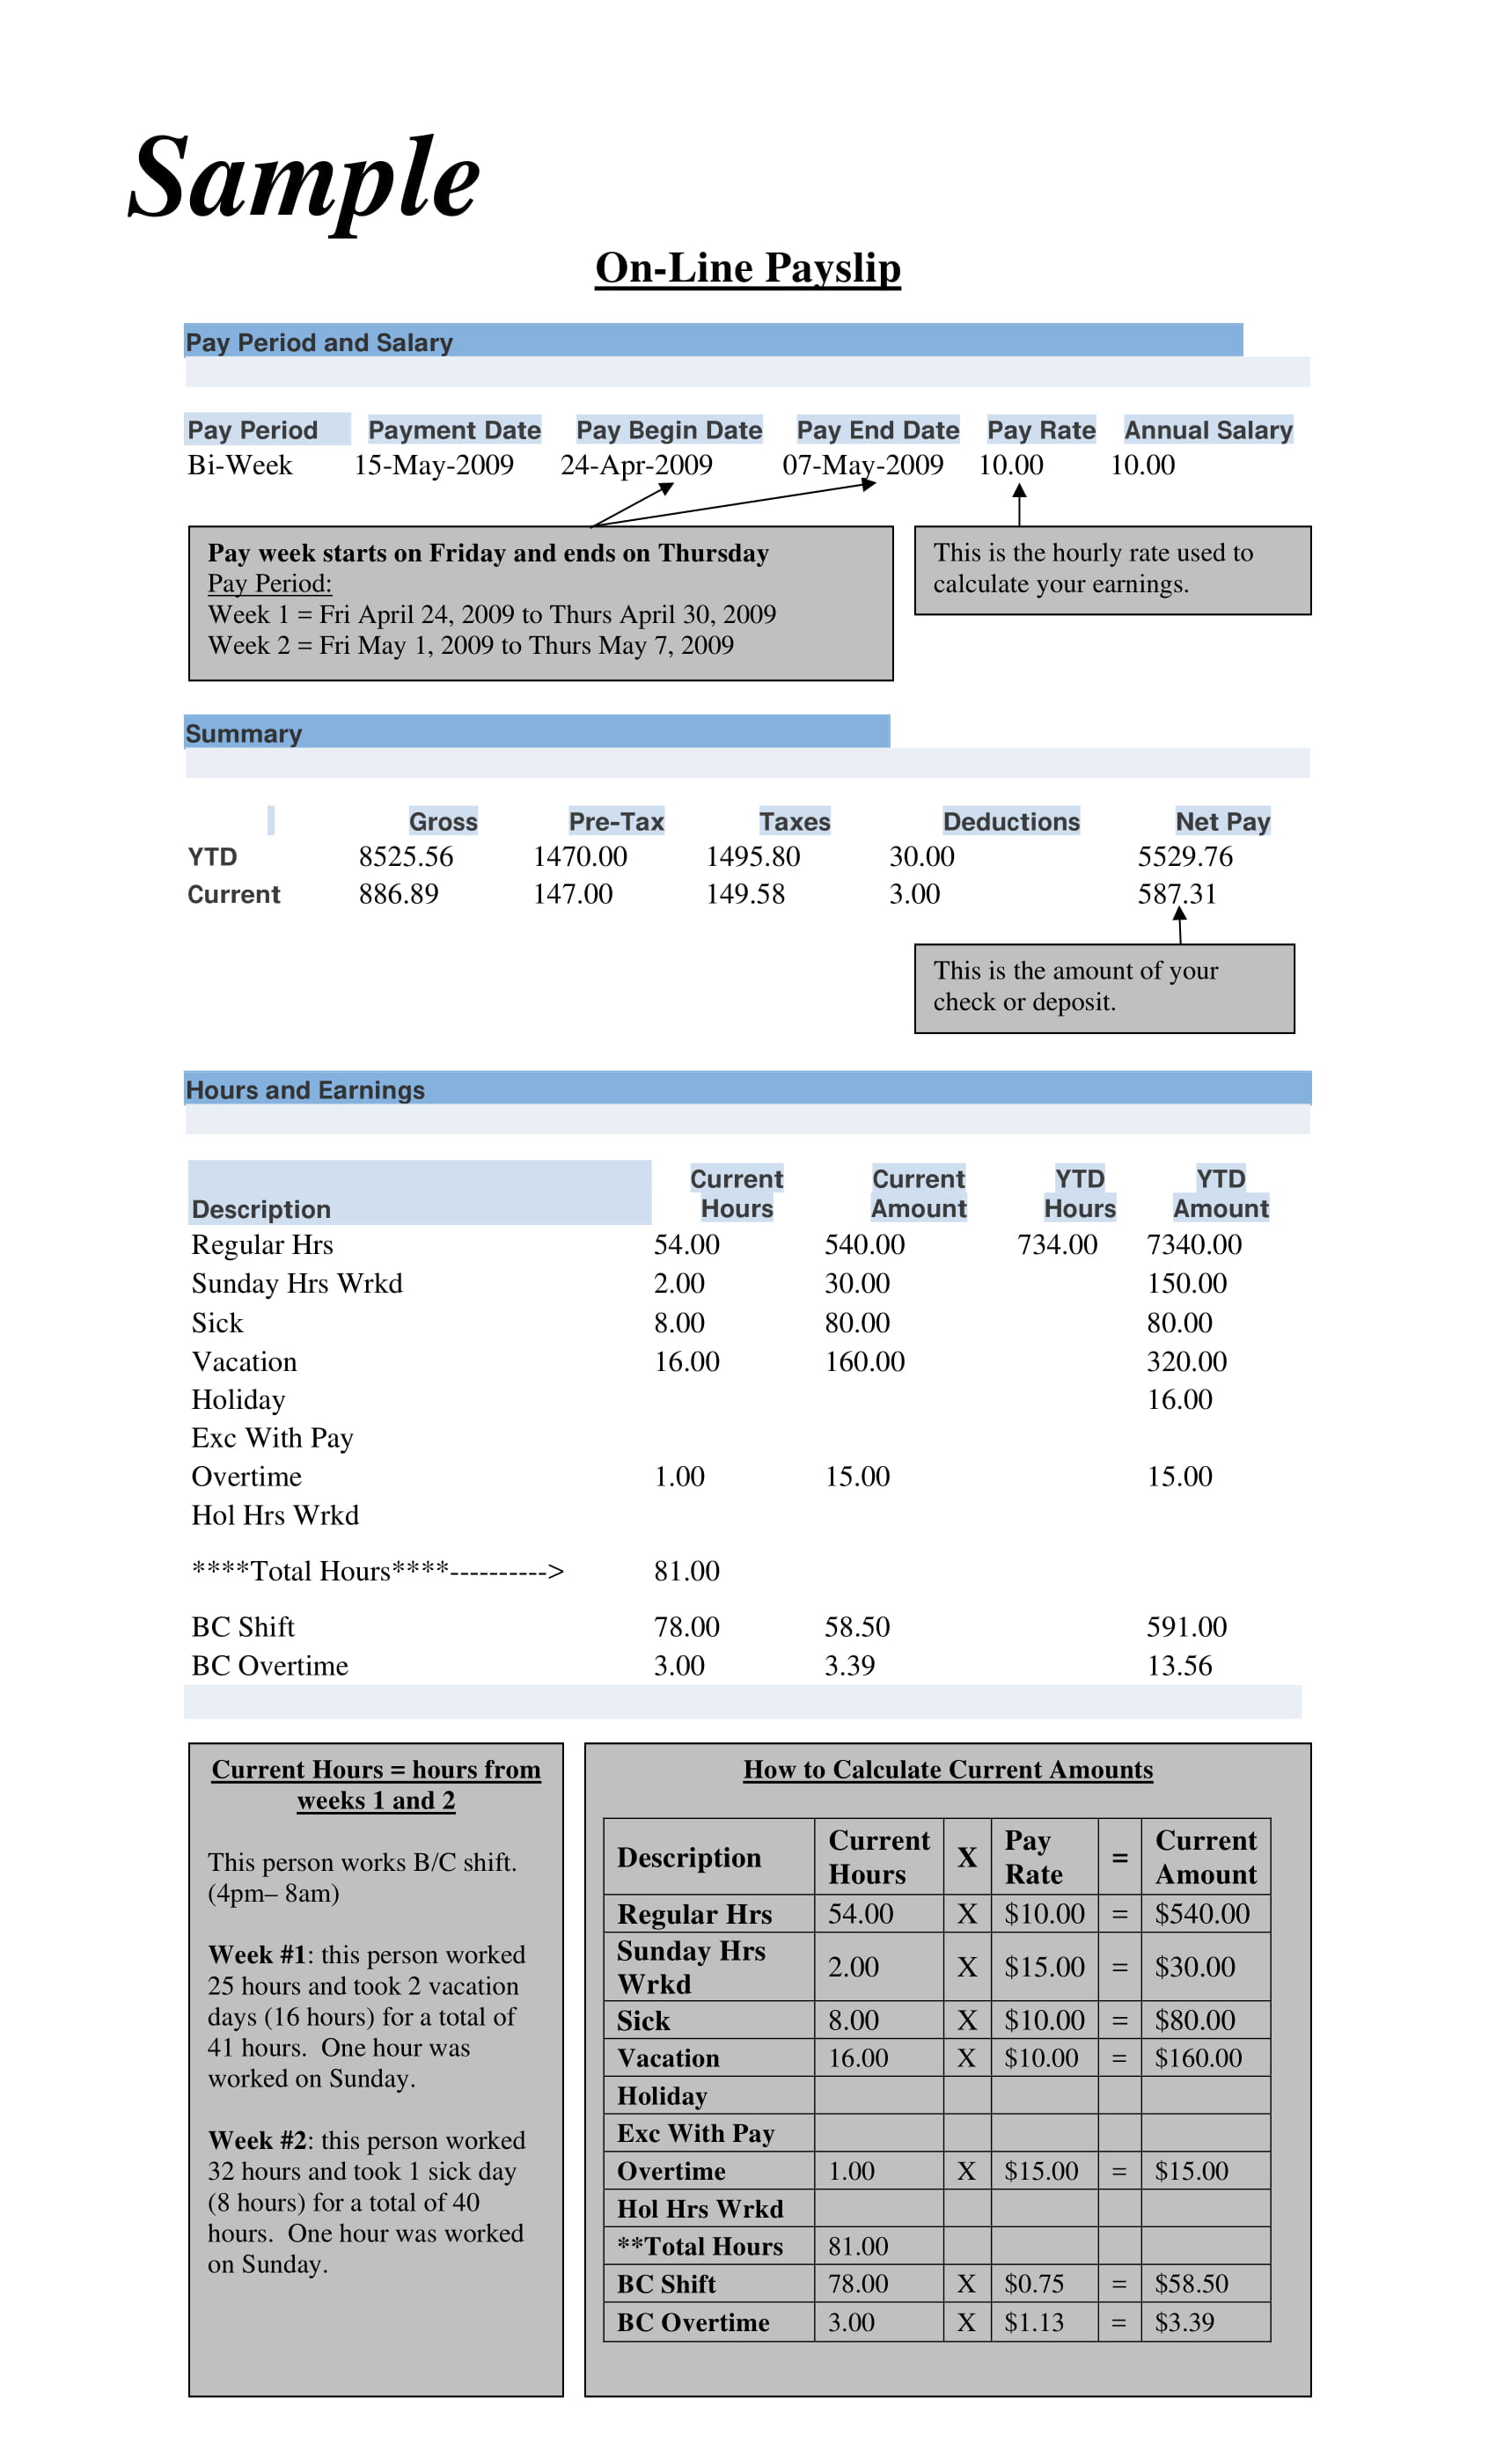 online payslip format example